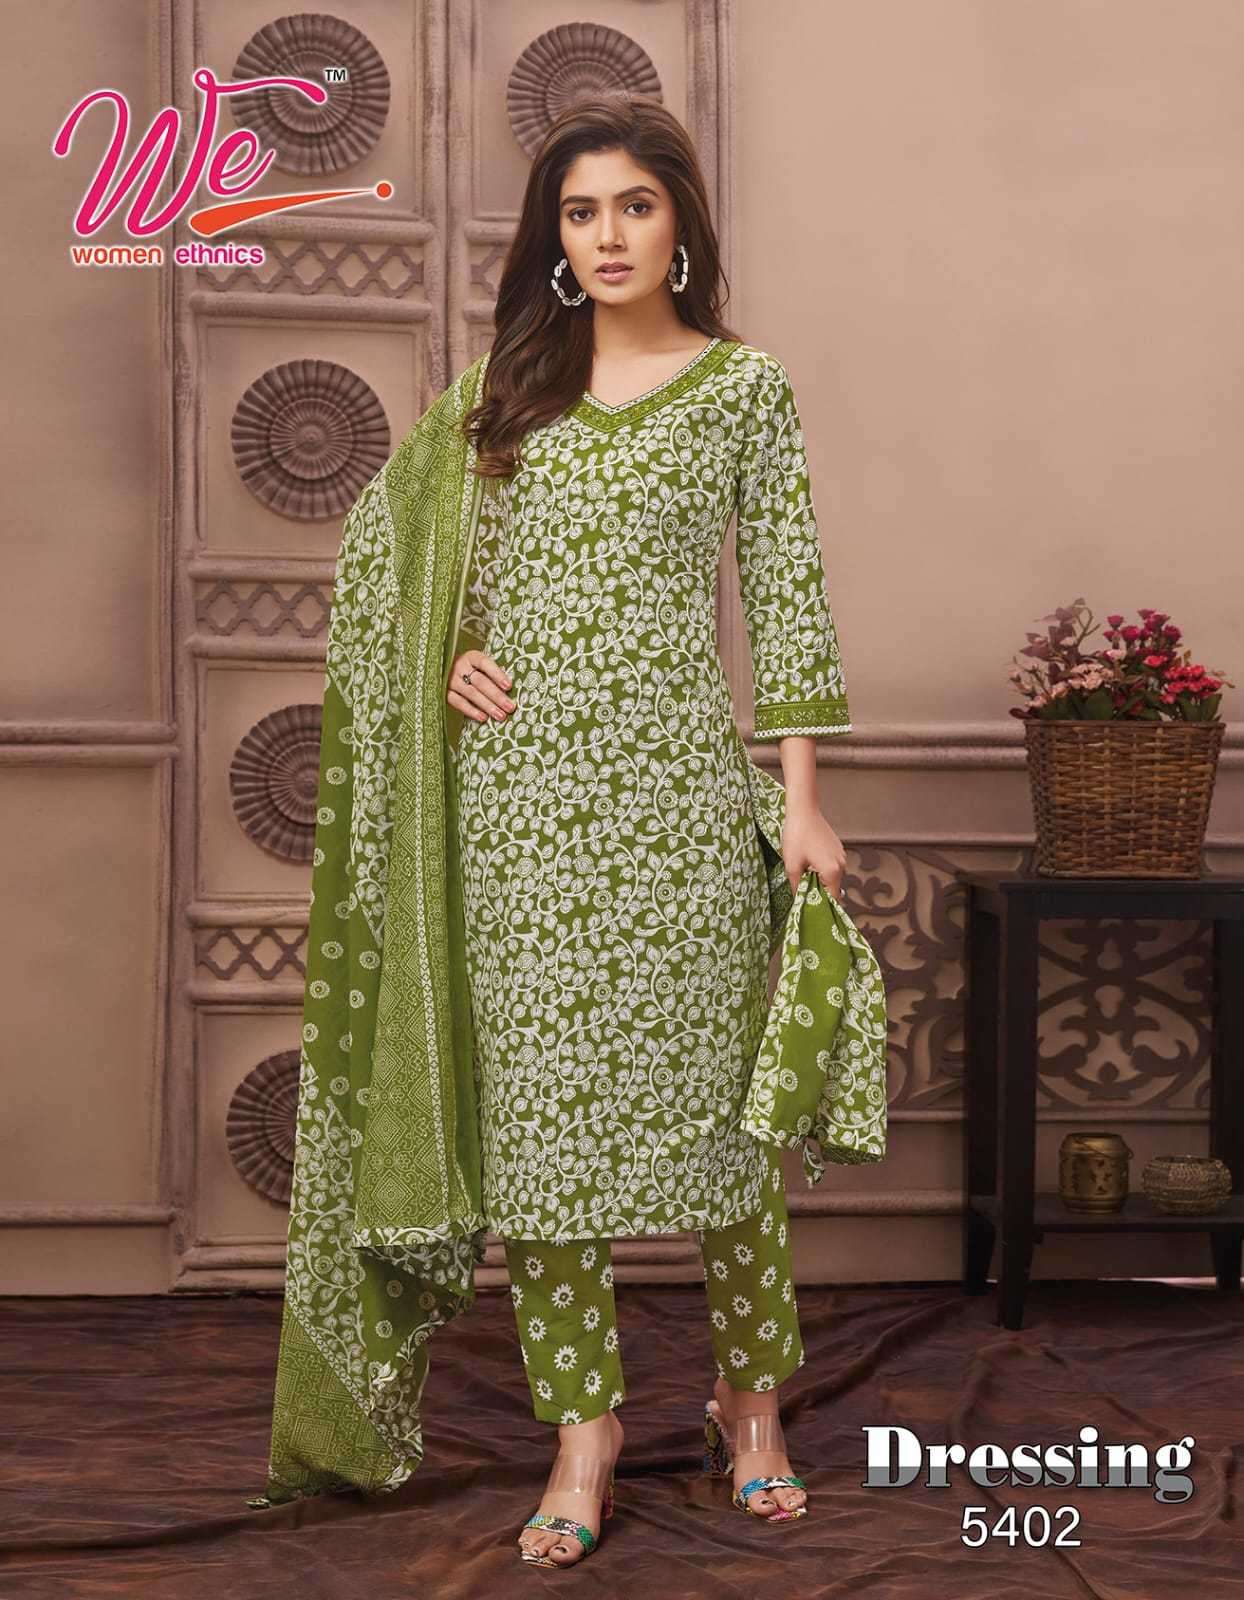 DRESSING SERIES 5401 TO 5406 BY WE DESIGNER PRINTED COTTON KURTI WITH BOTTOM AND DUPATTA ARE AVAILABLE AT WHOLESALE PRICE